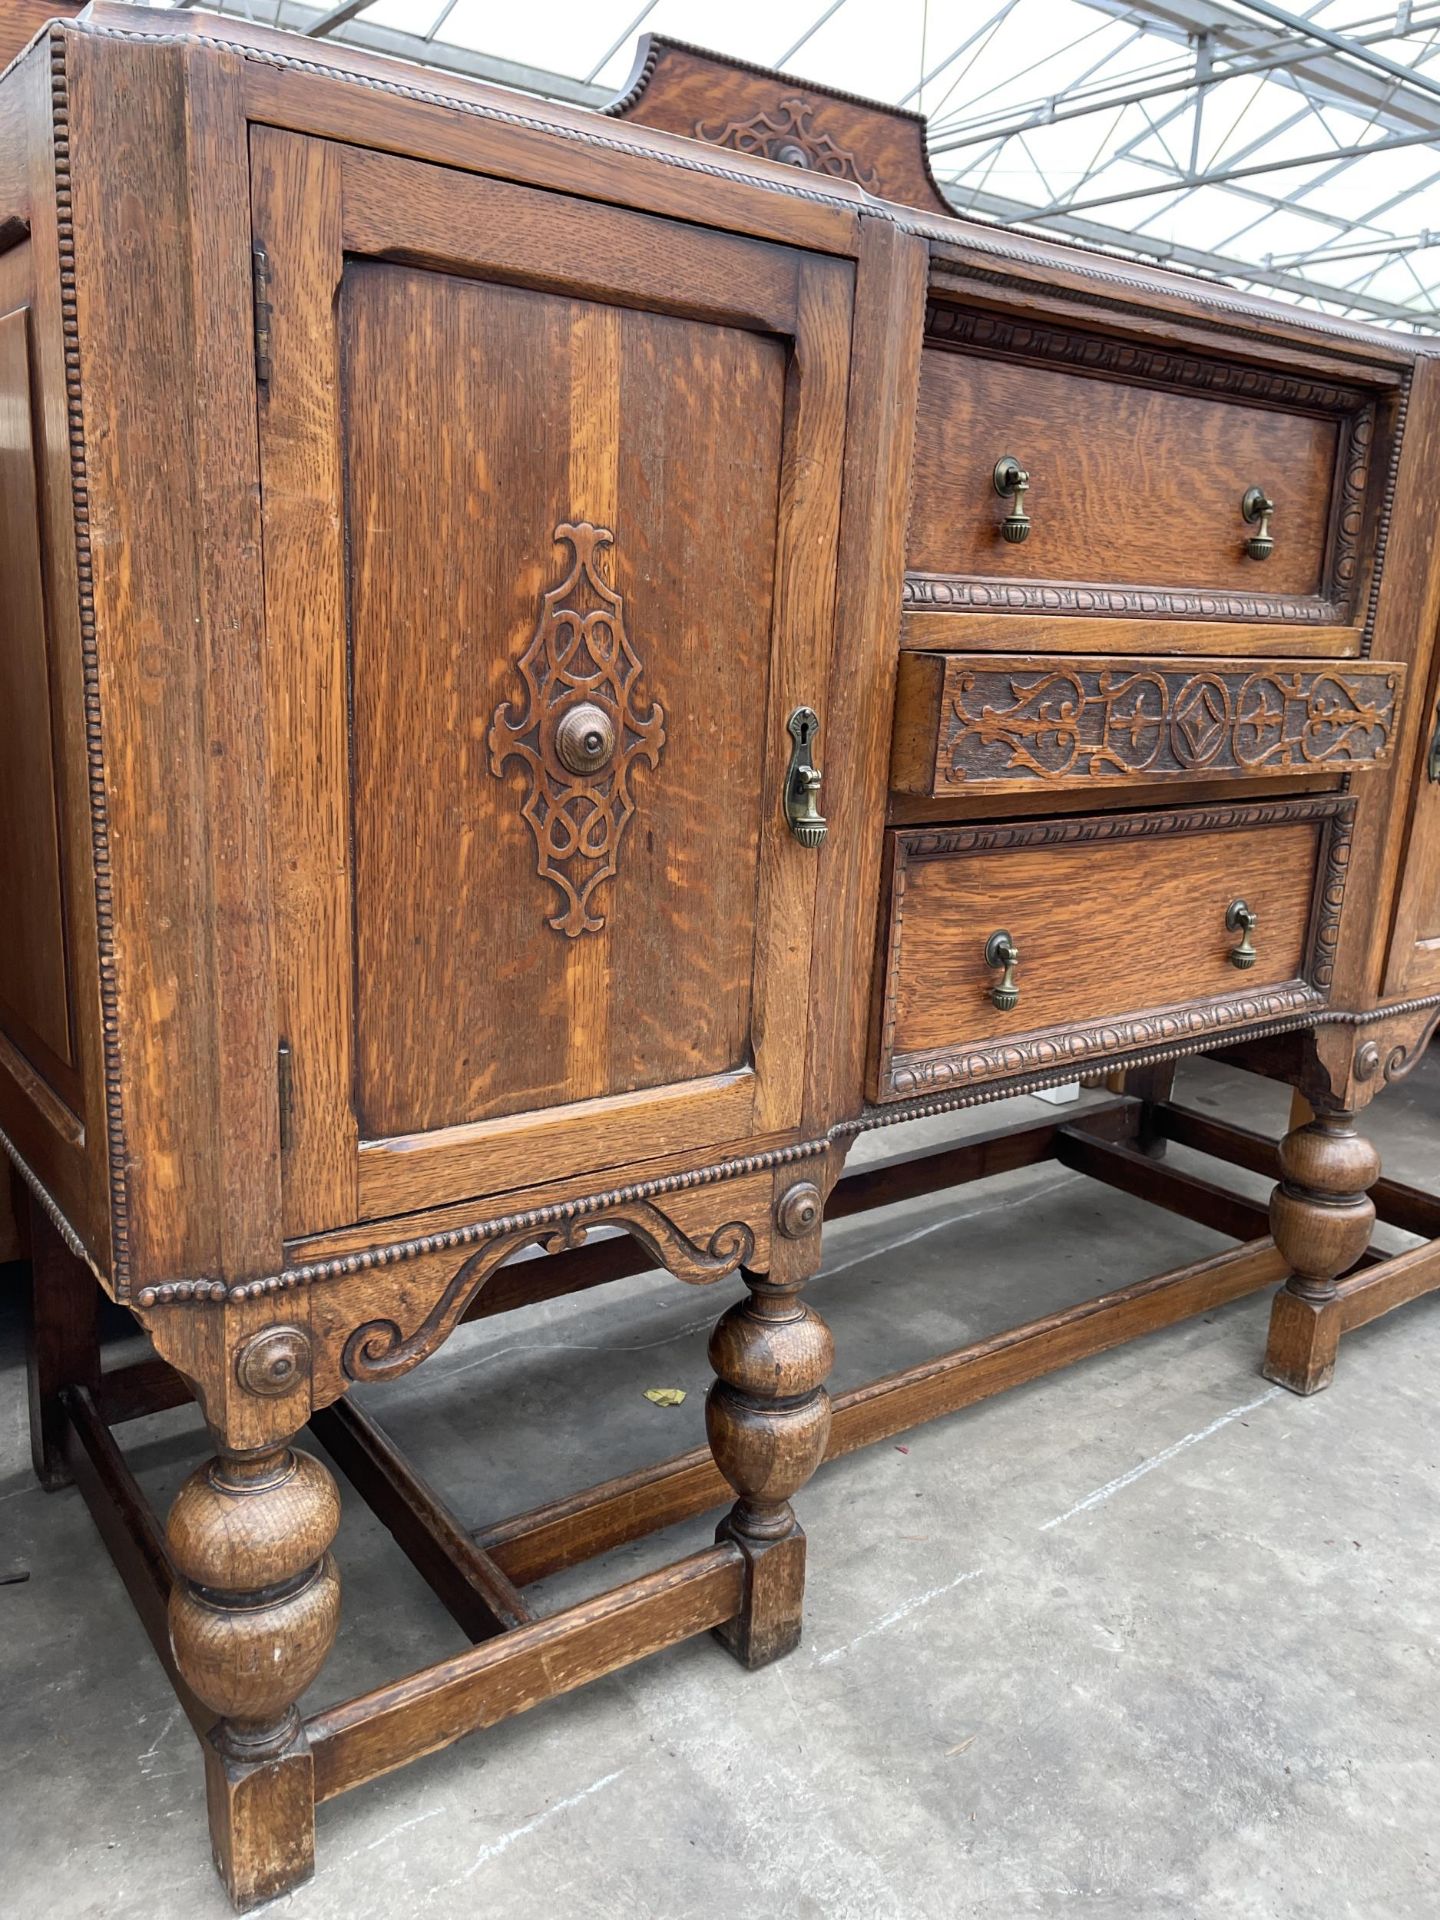 AN EARLY 20TH CENTURY OAK JACOBEAN STYLE BREAK FRONT SIDEBOARD WITH RAISED RACK, 60" WIDE - Image 5 of 6